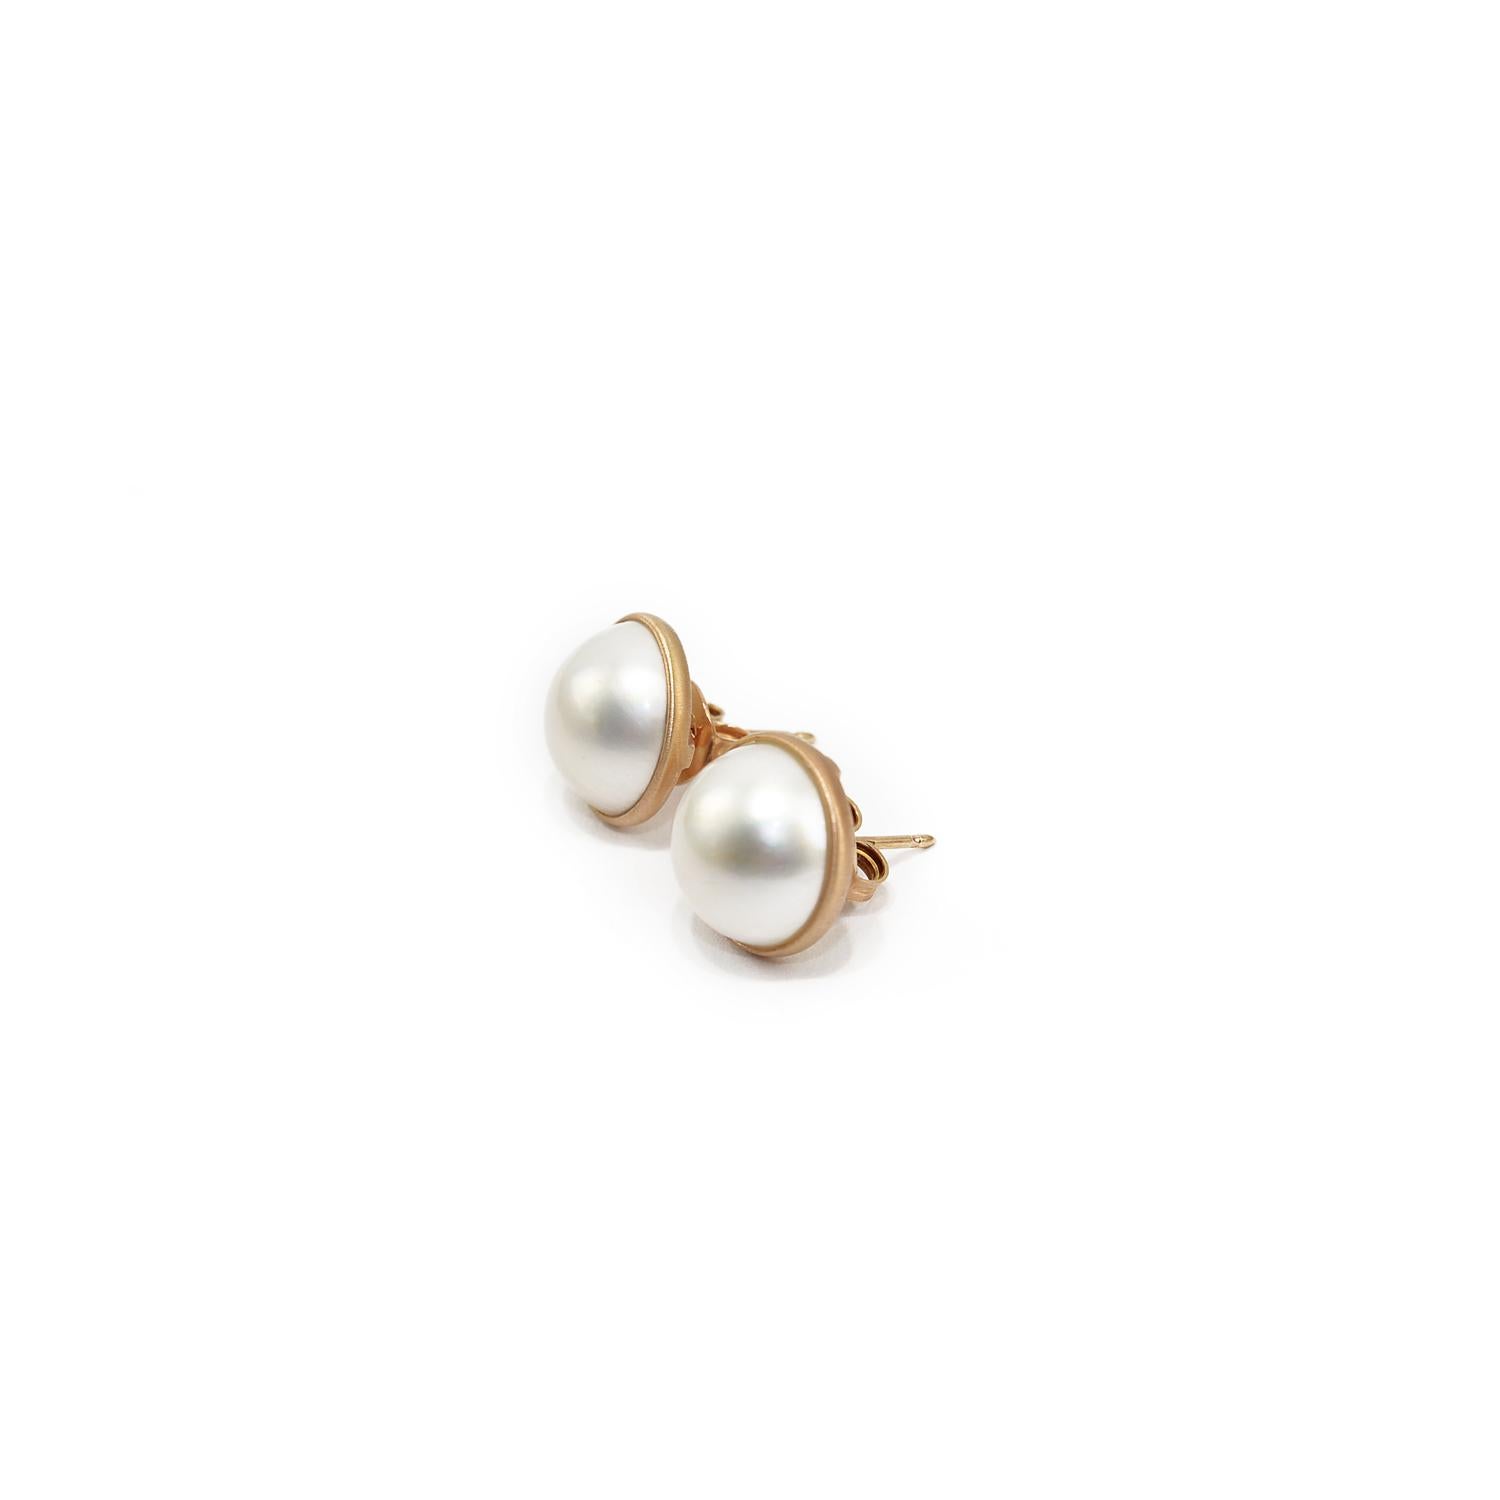 Artisan Stud Earrings in 18 Karat Gold and Mabe Pearls For Sale